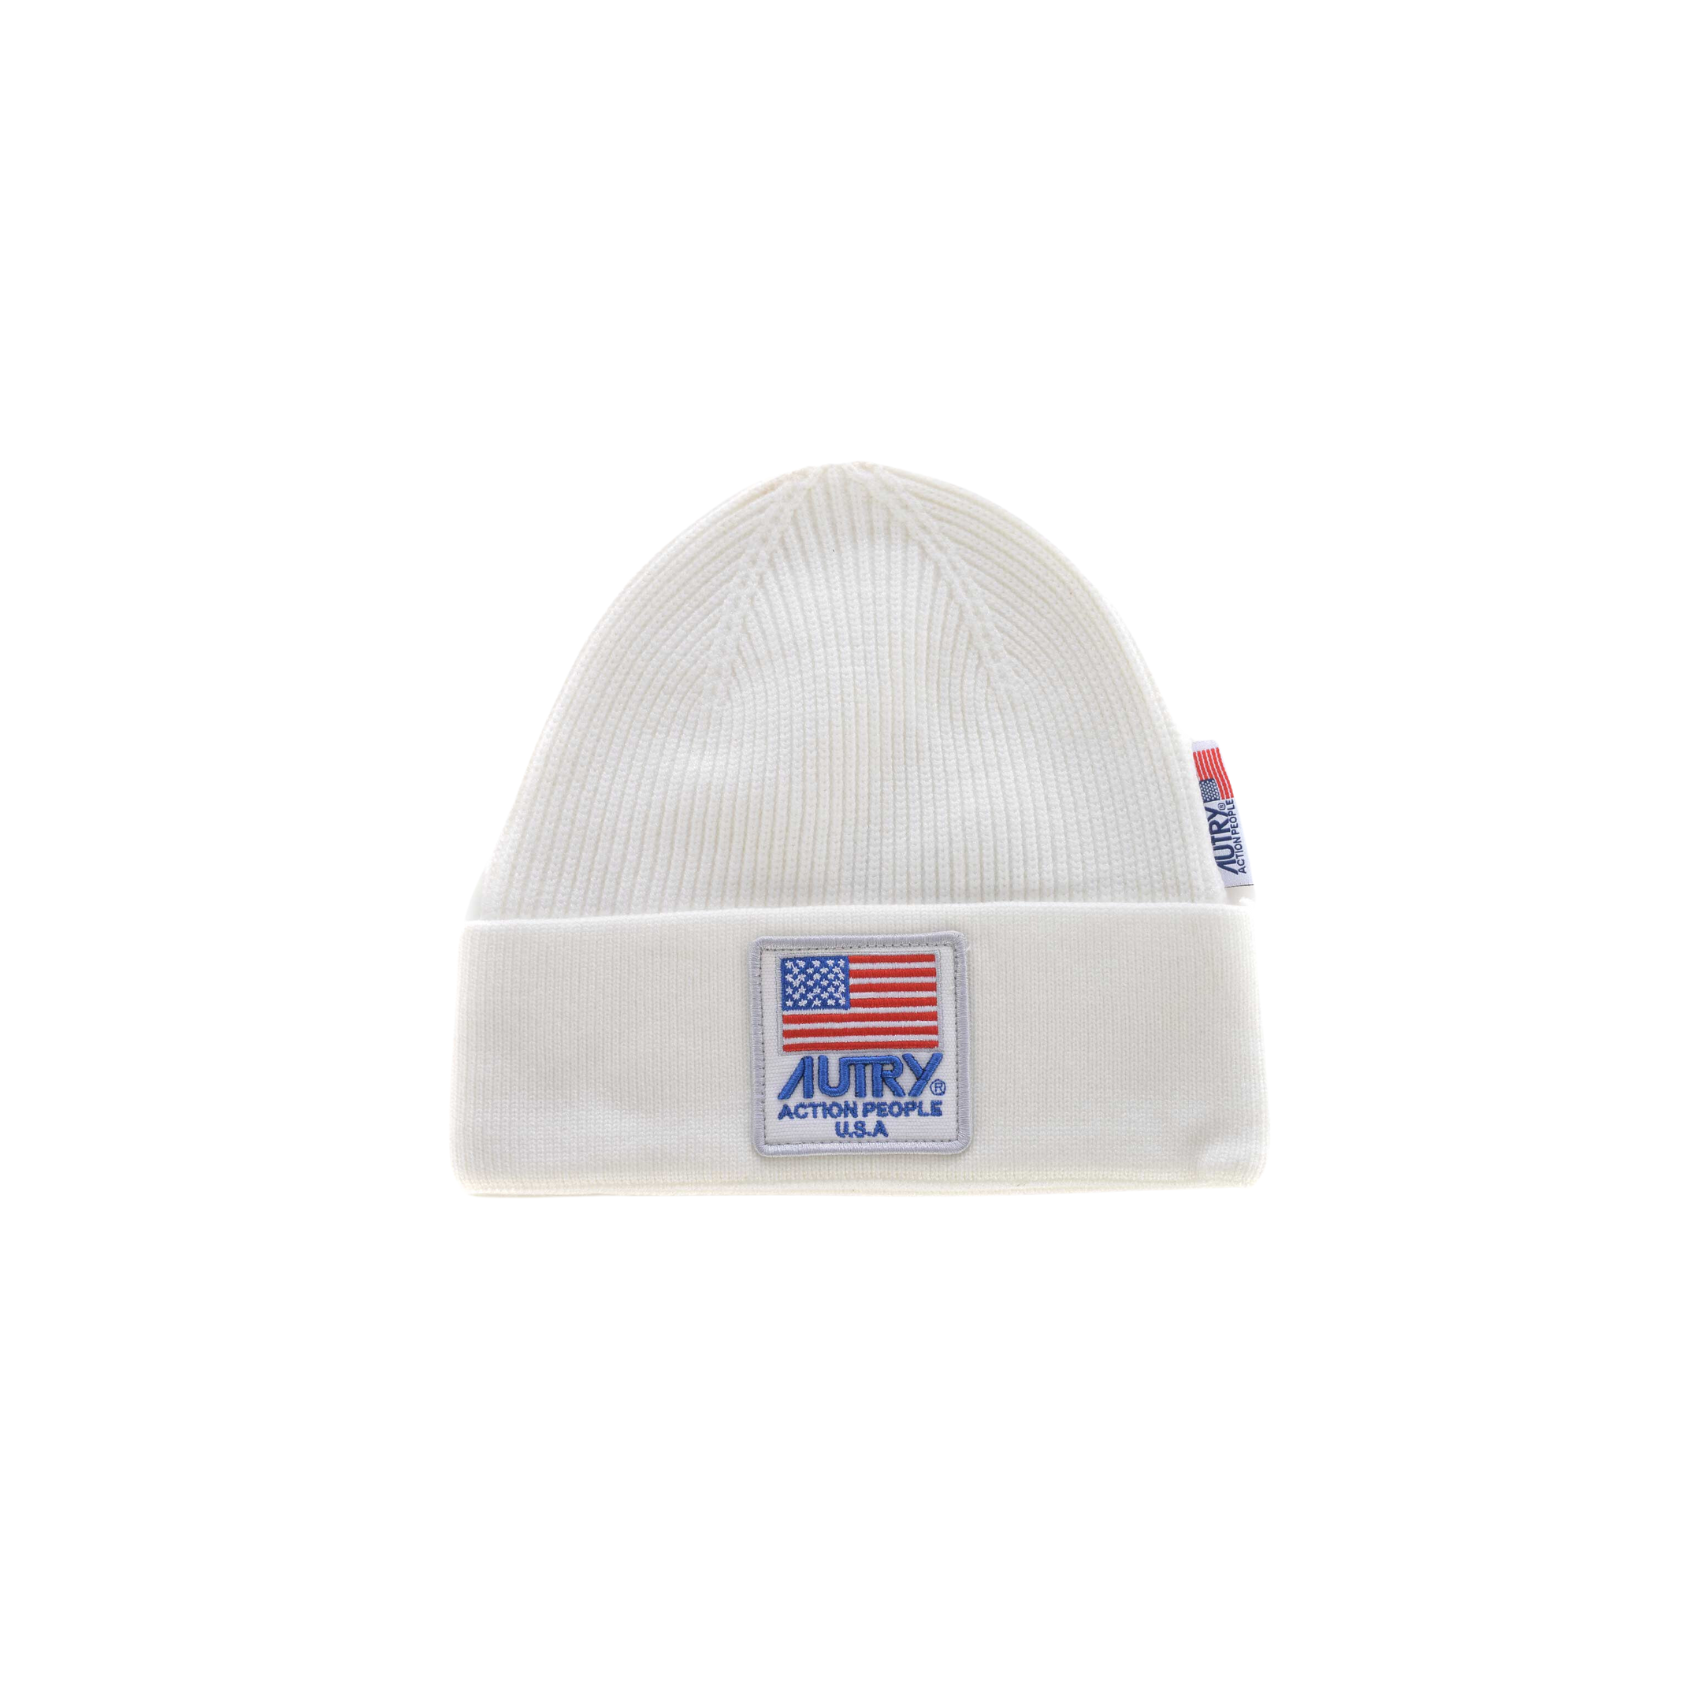 Cap Iconic Patch - White